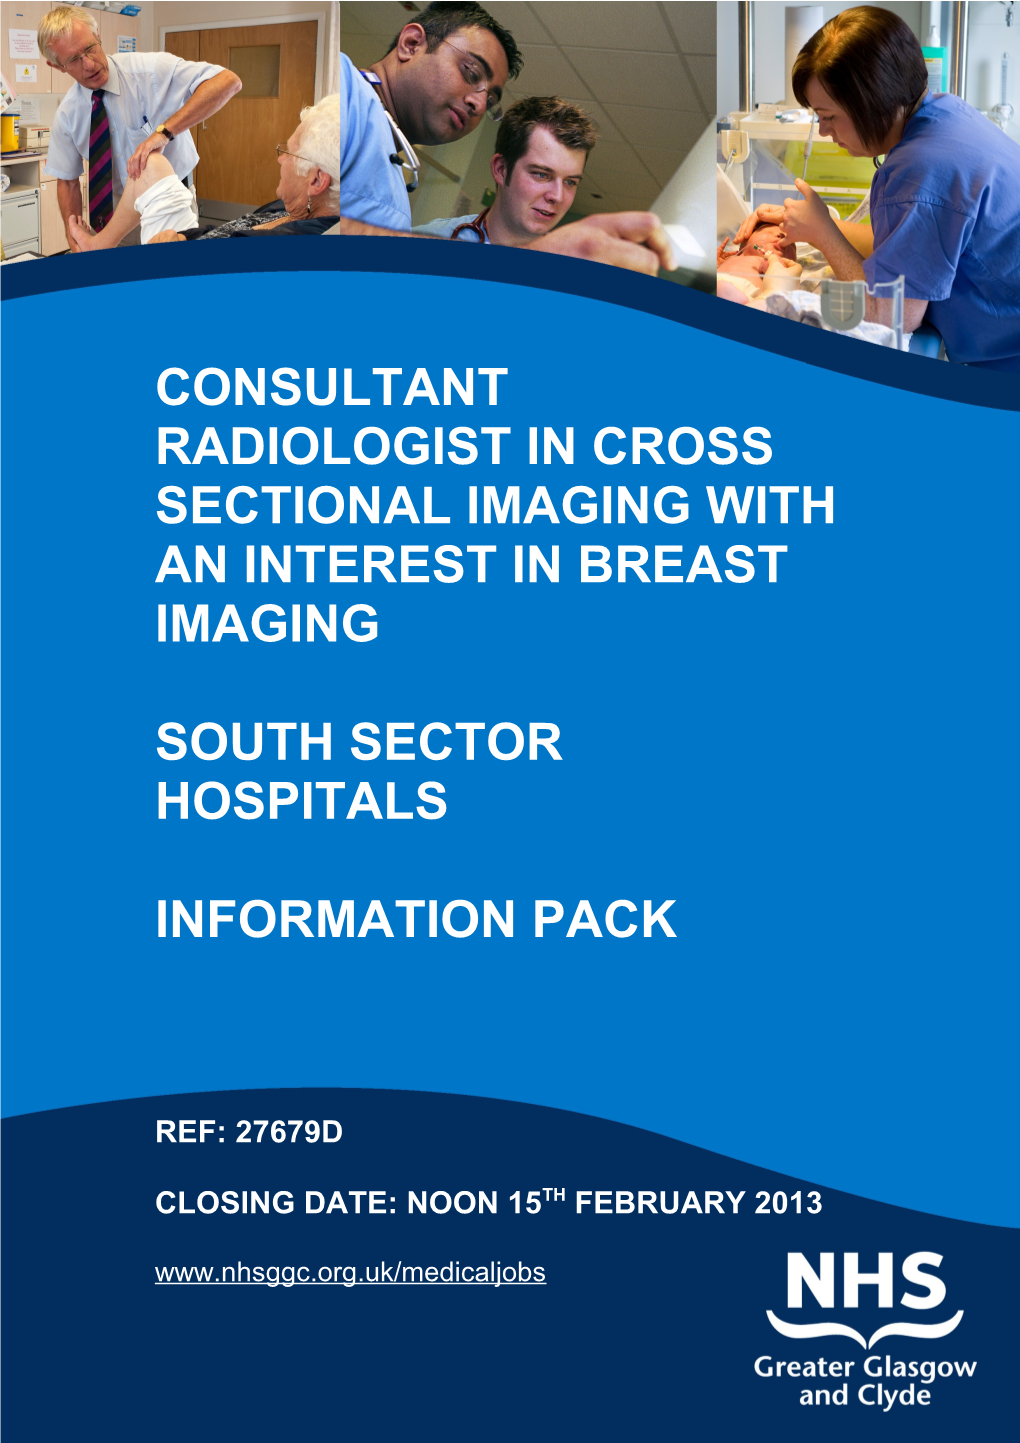 Consultant Radiologist in Cross Sectional Imaging with an Interest in Breast Imaging